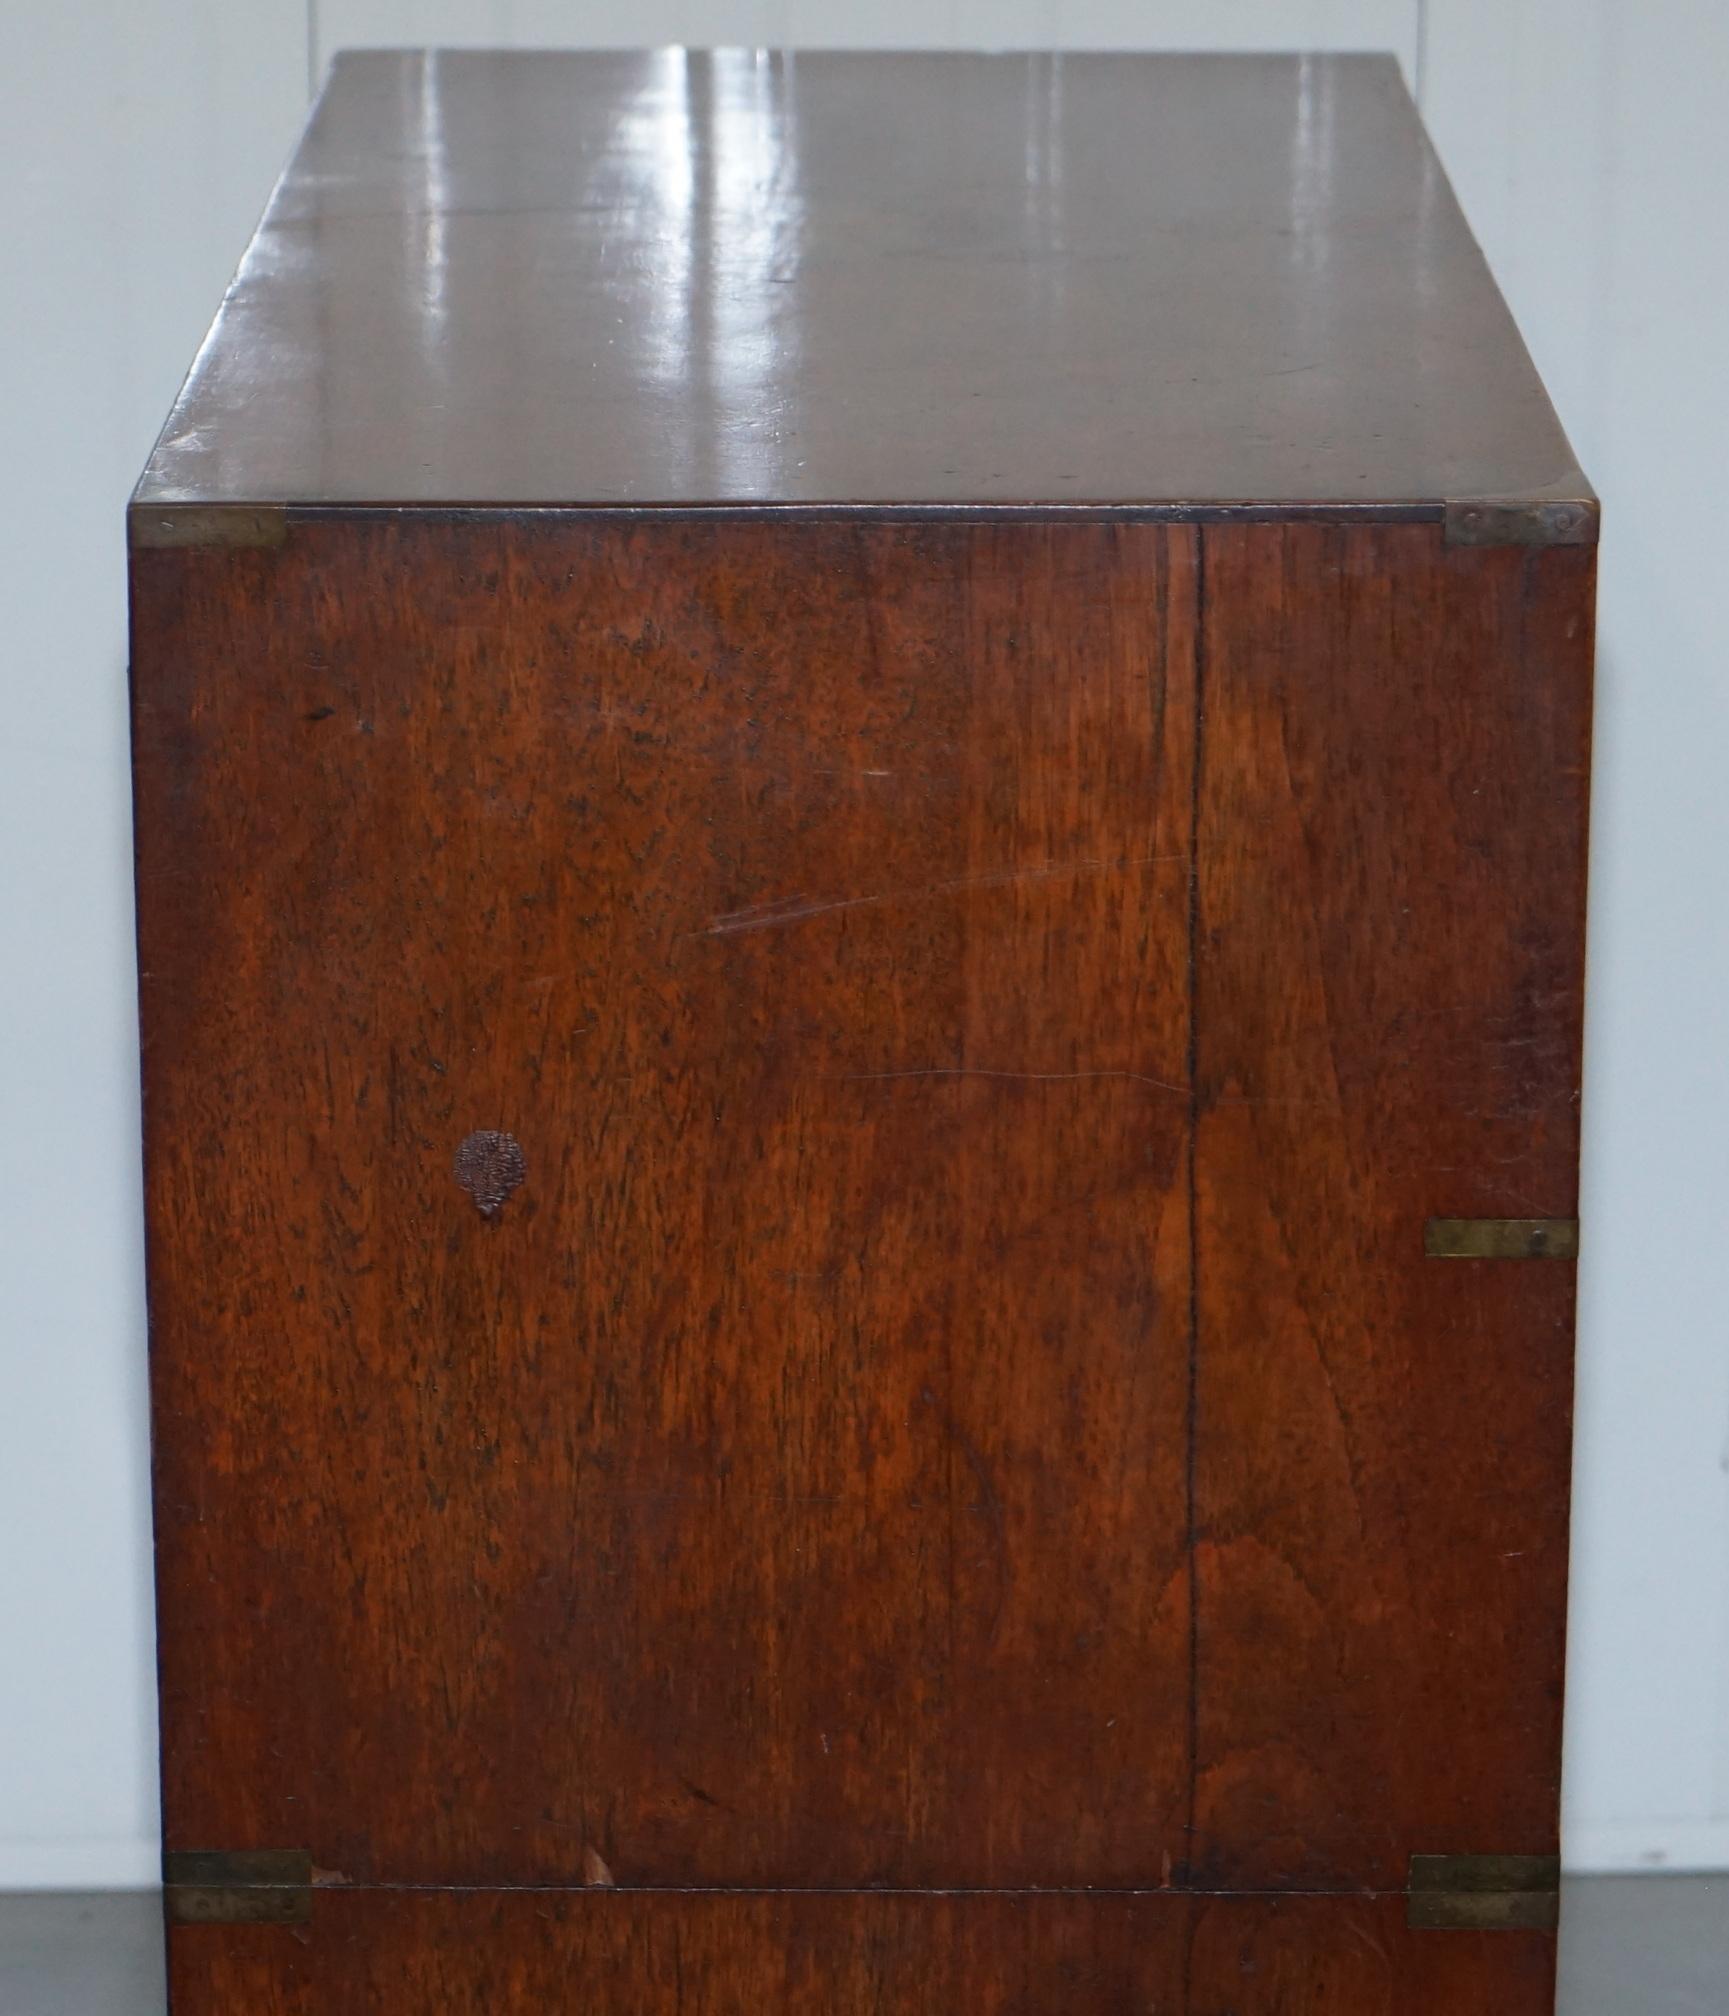 Brass Original 1890 Army & Navy C.S.L Stamped Campaign Chest of Drawers Including Desk For Sale